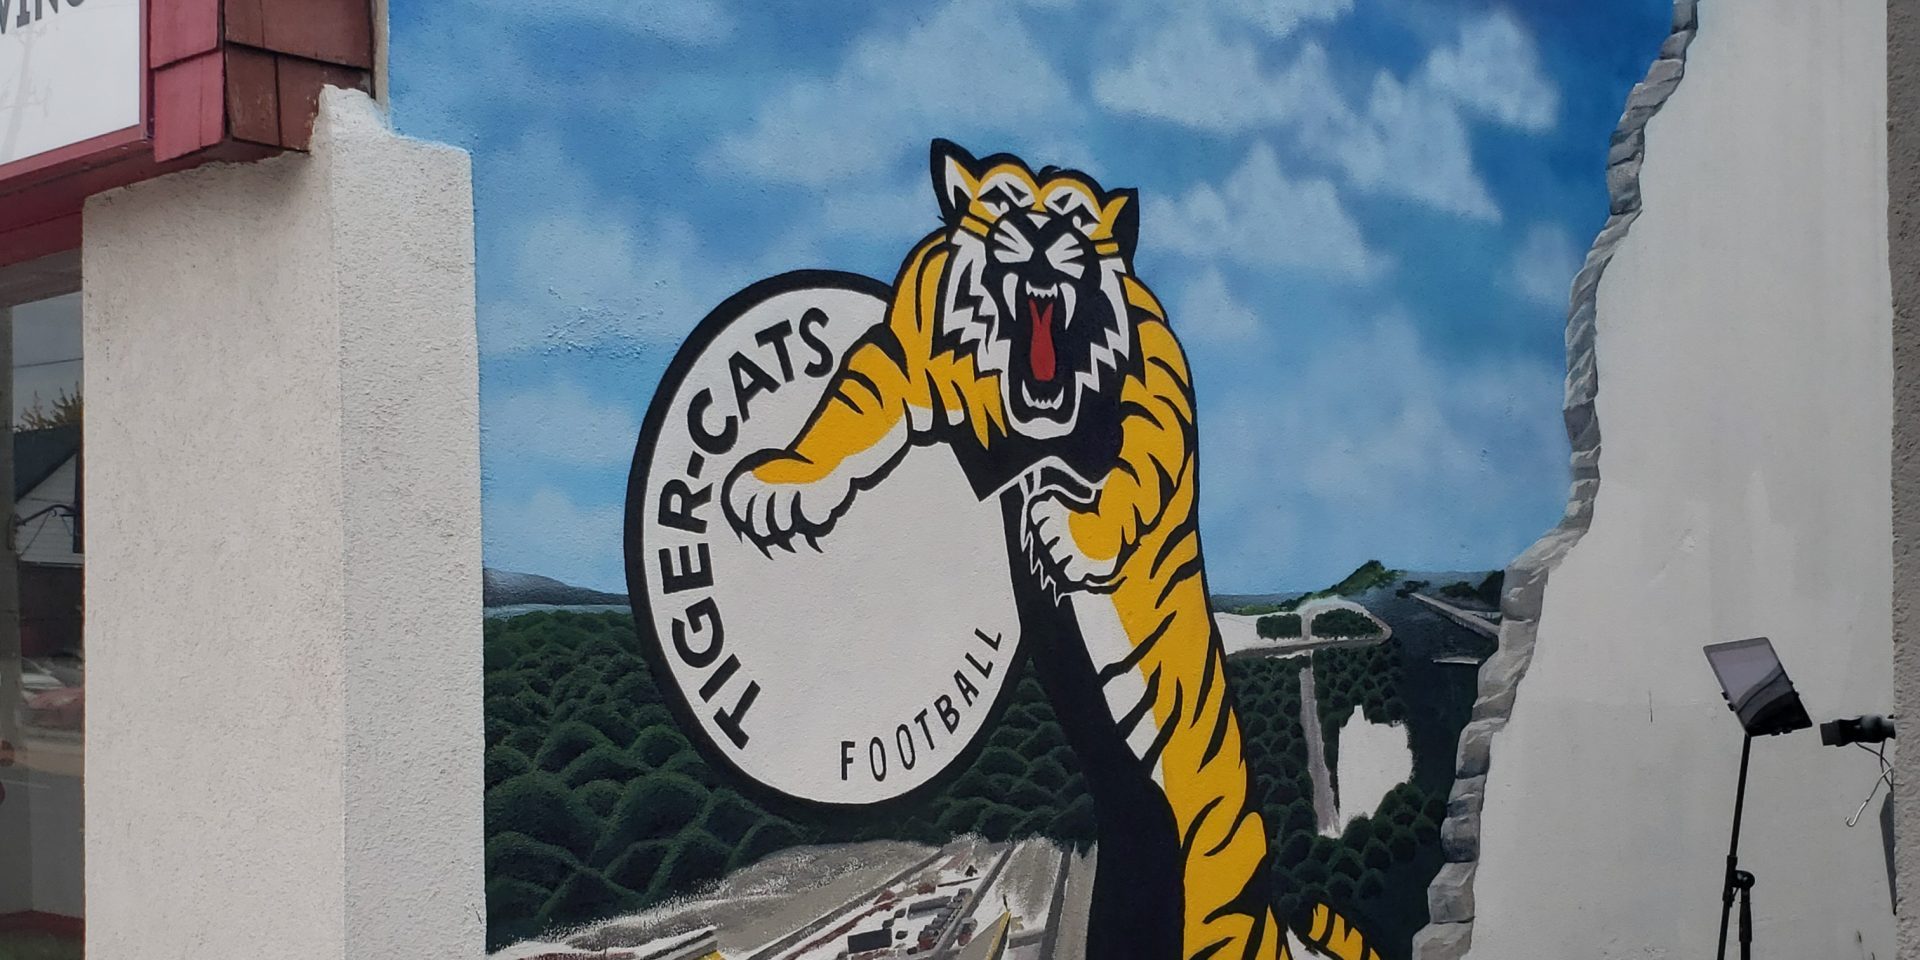 Hamilton selfie contest officially underway at Tiger-Cats-themed escarpment mural